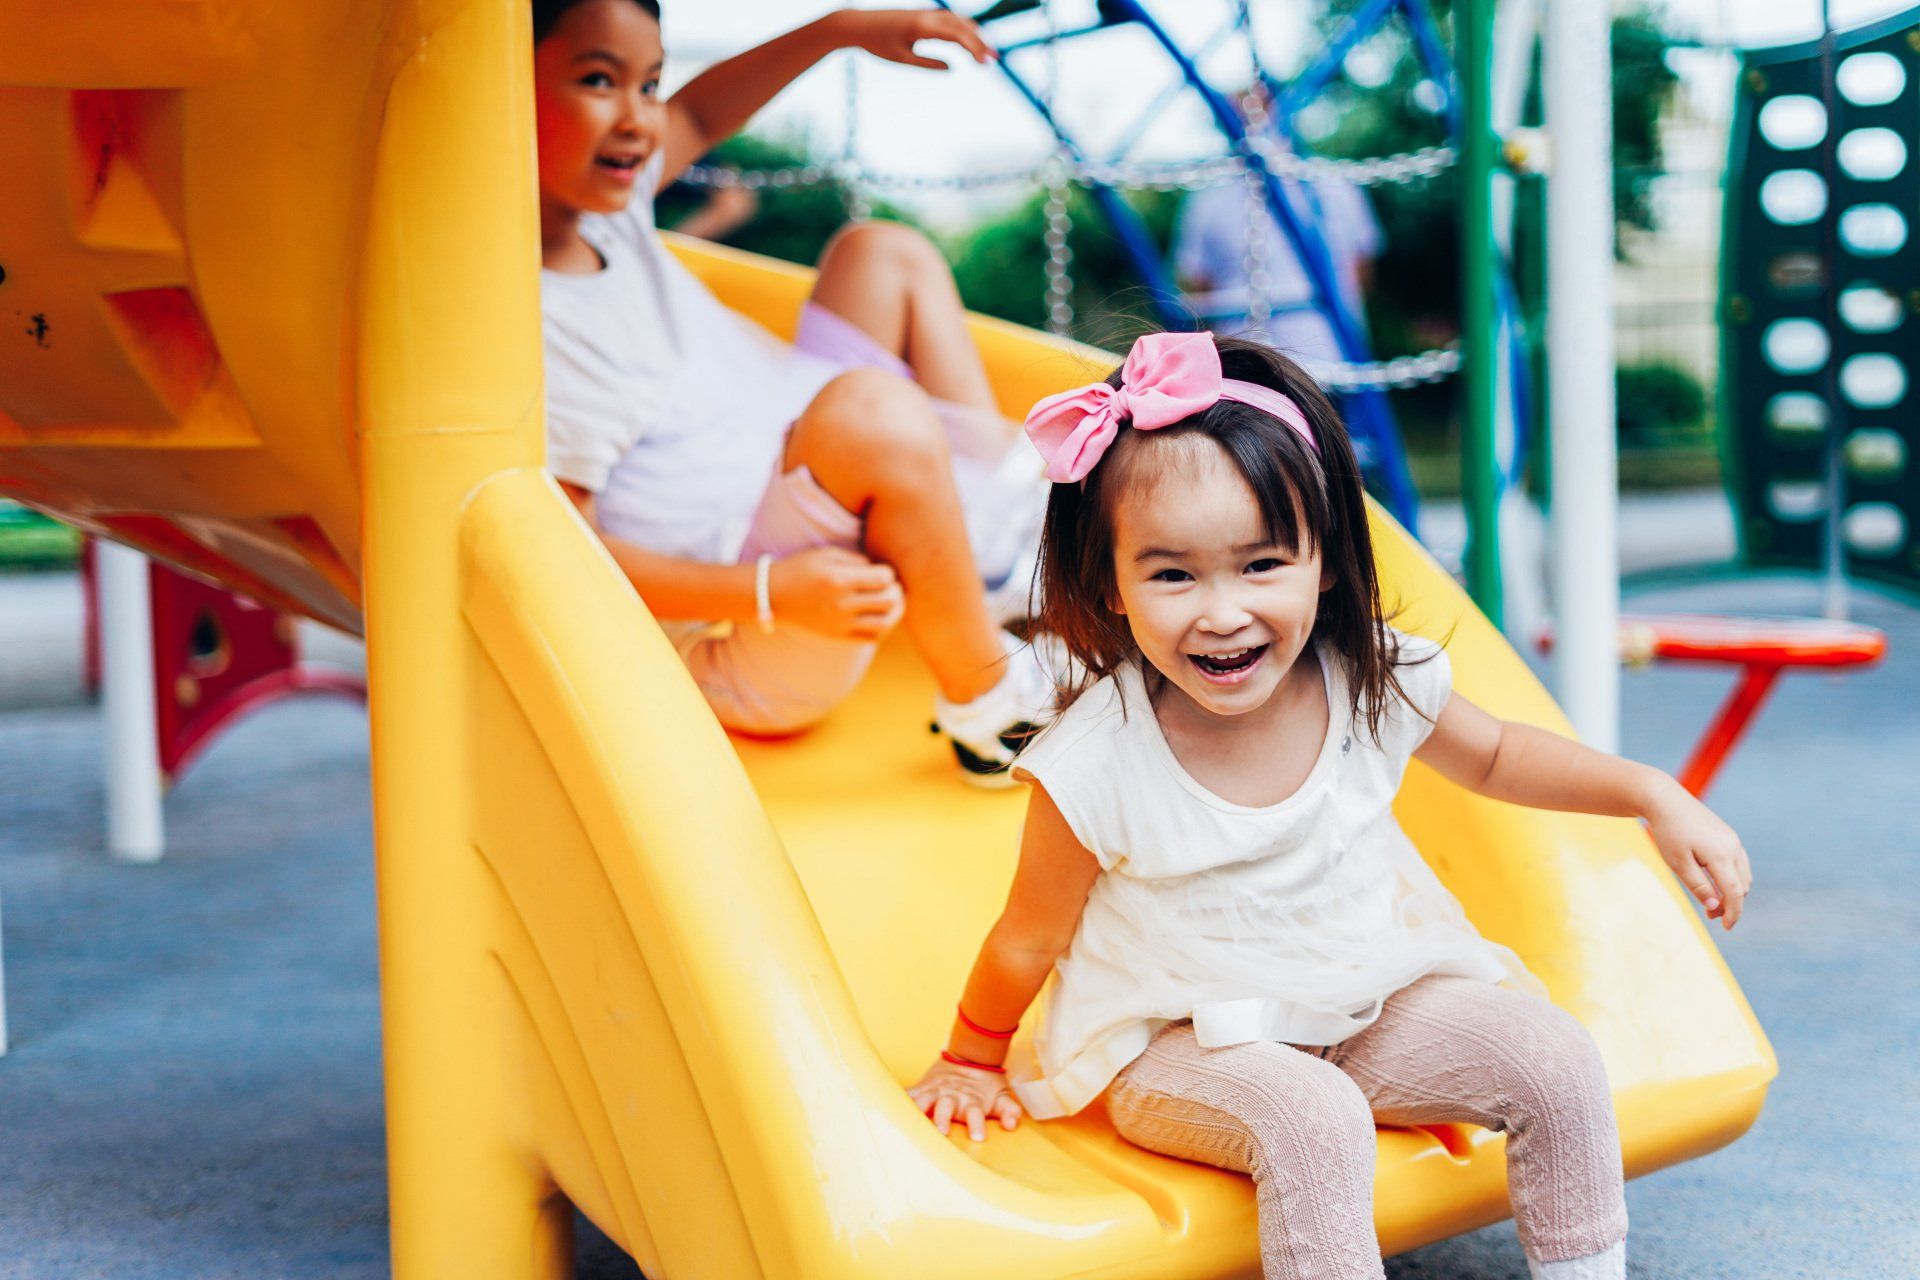 Avoiding Personal Injury at Playgrounds